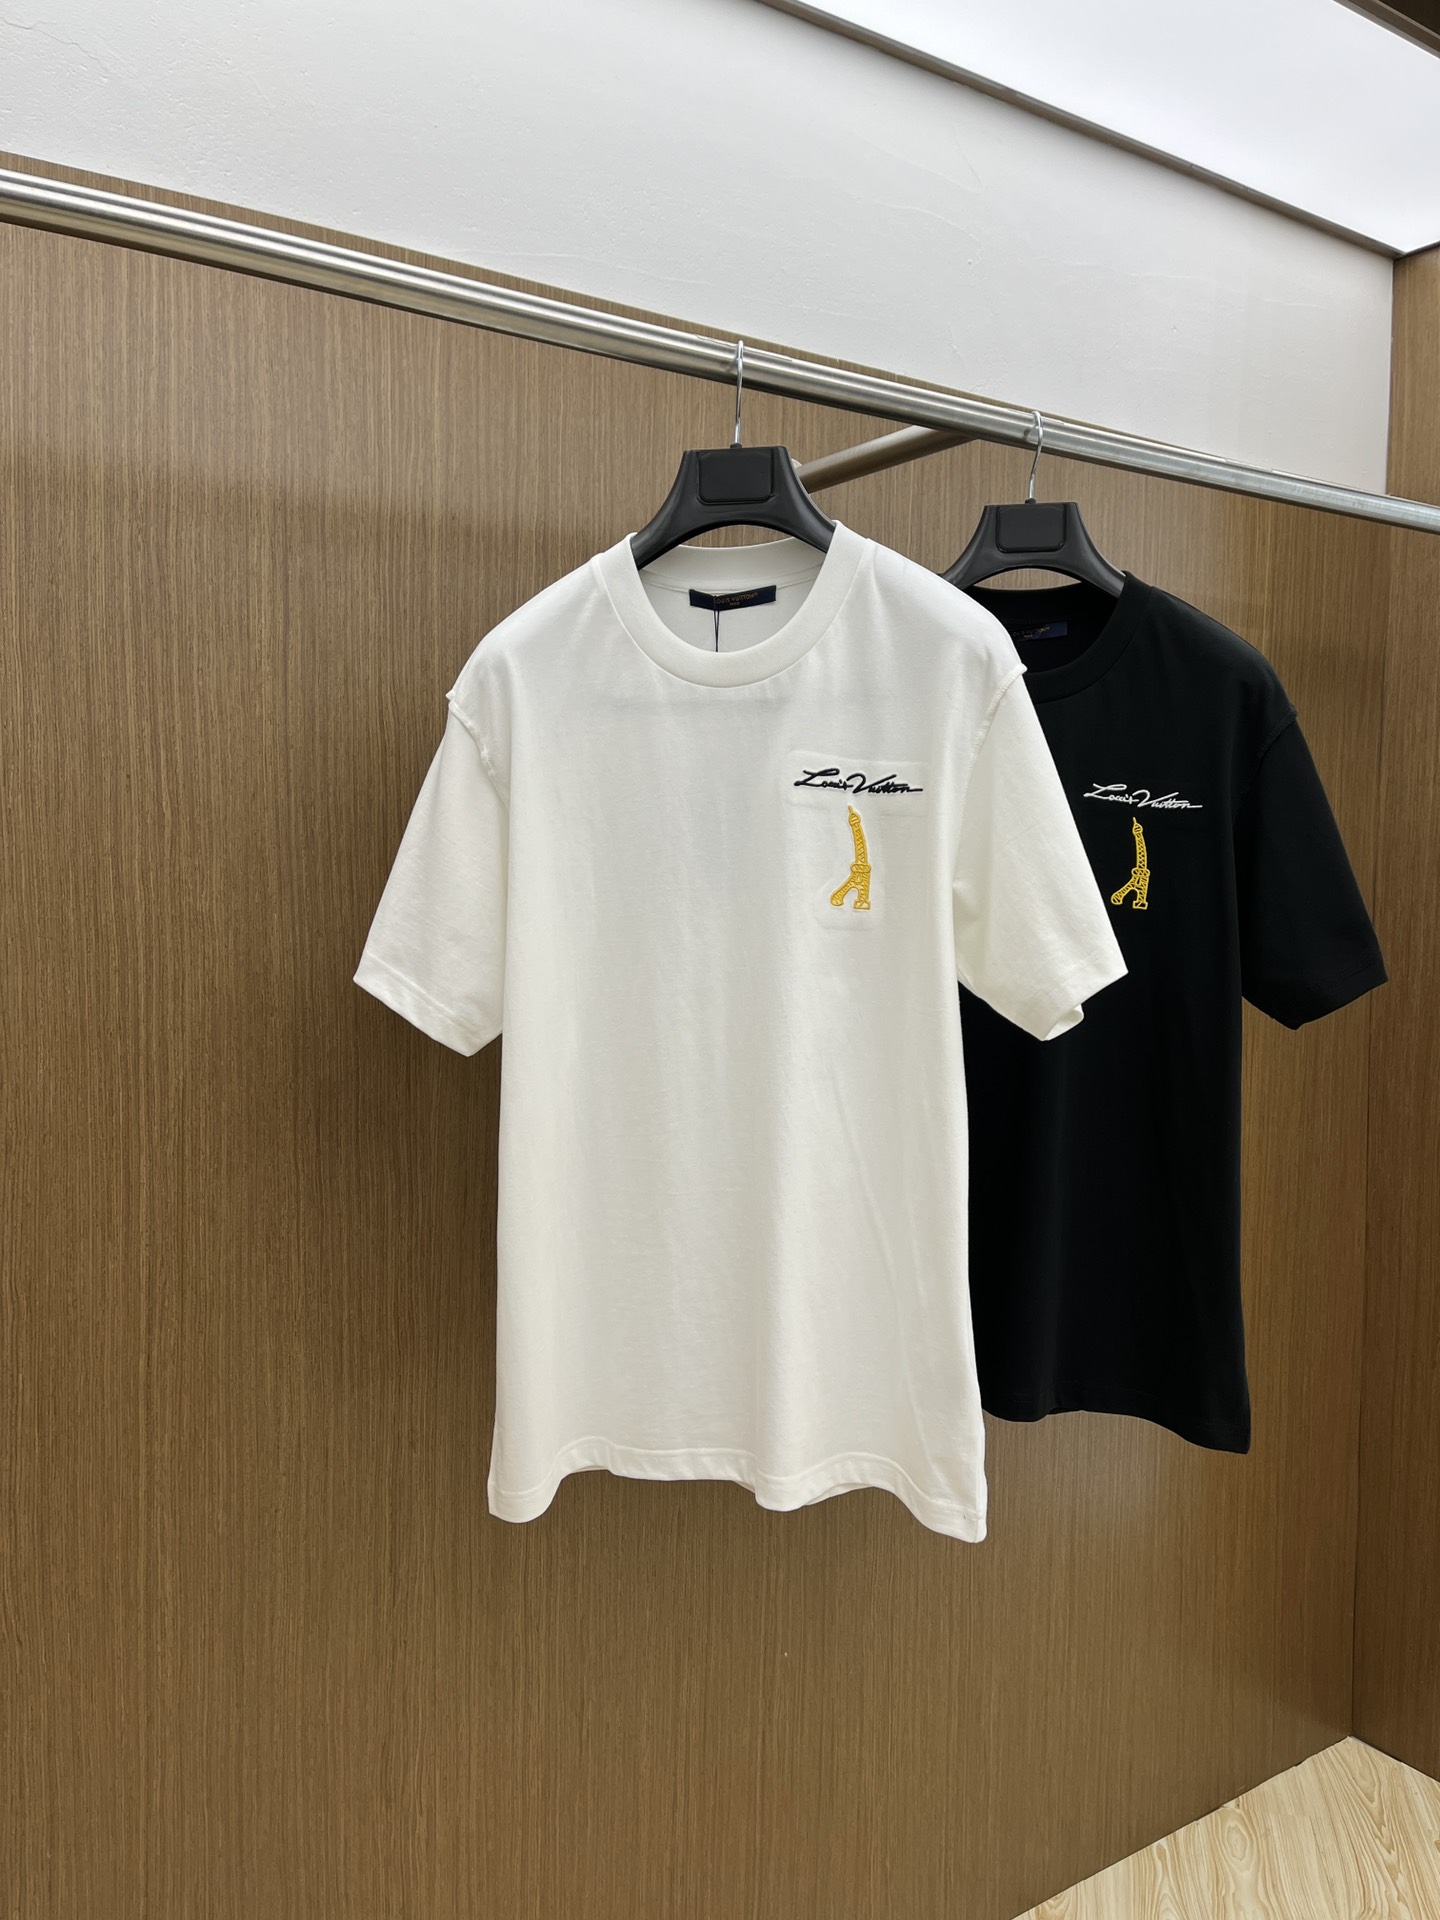 Louis Vuitton Clothing T-Shirt Cotton Spring Collection Fashion Short Sleeve